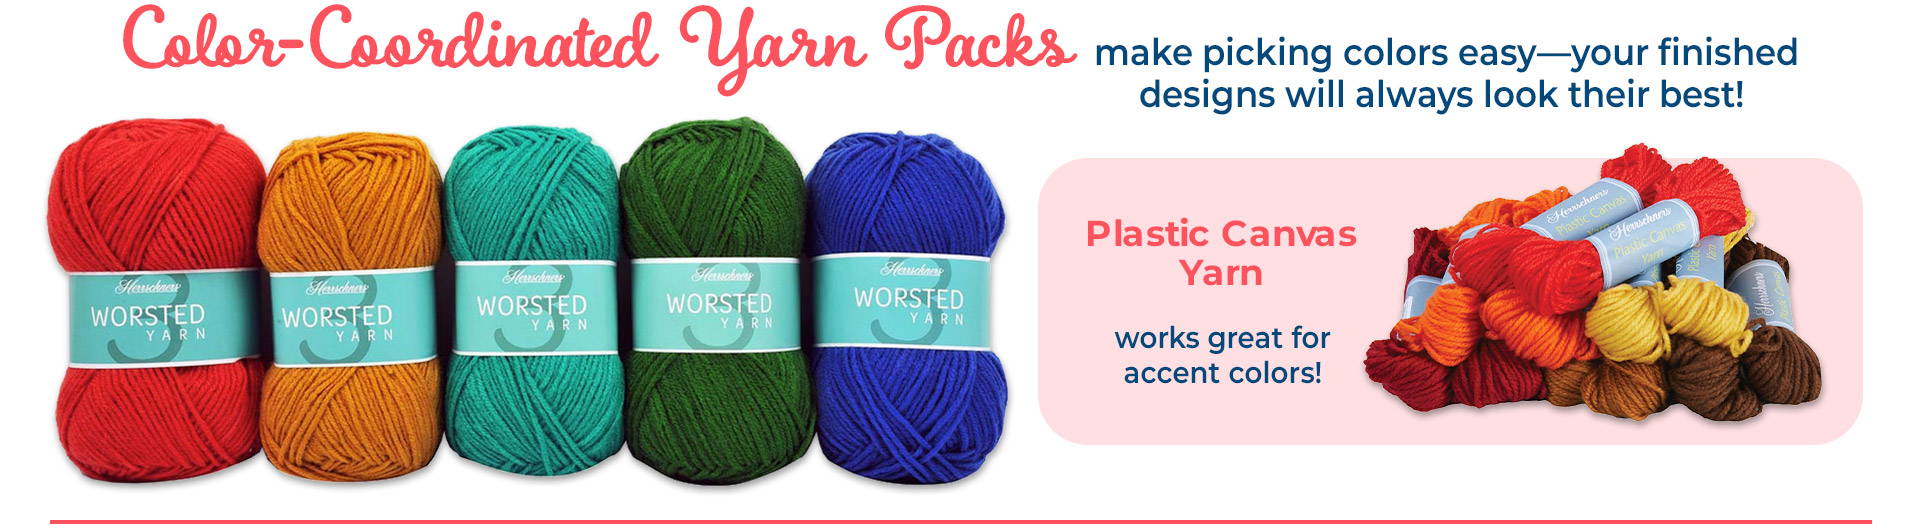 Color-Coordinated Yarn Packs